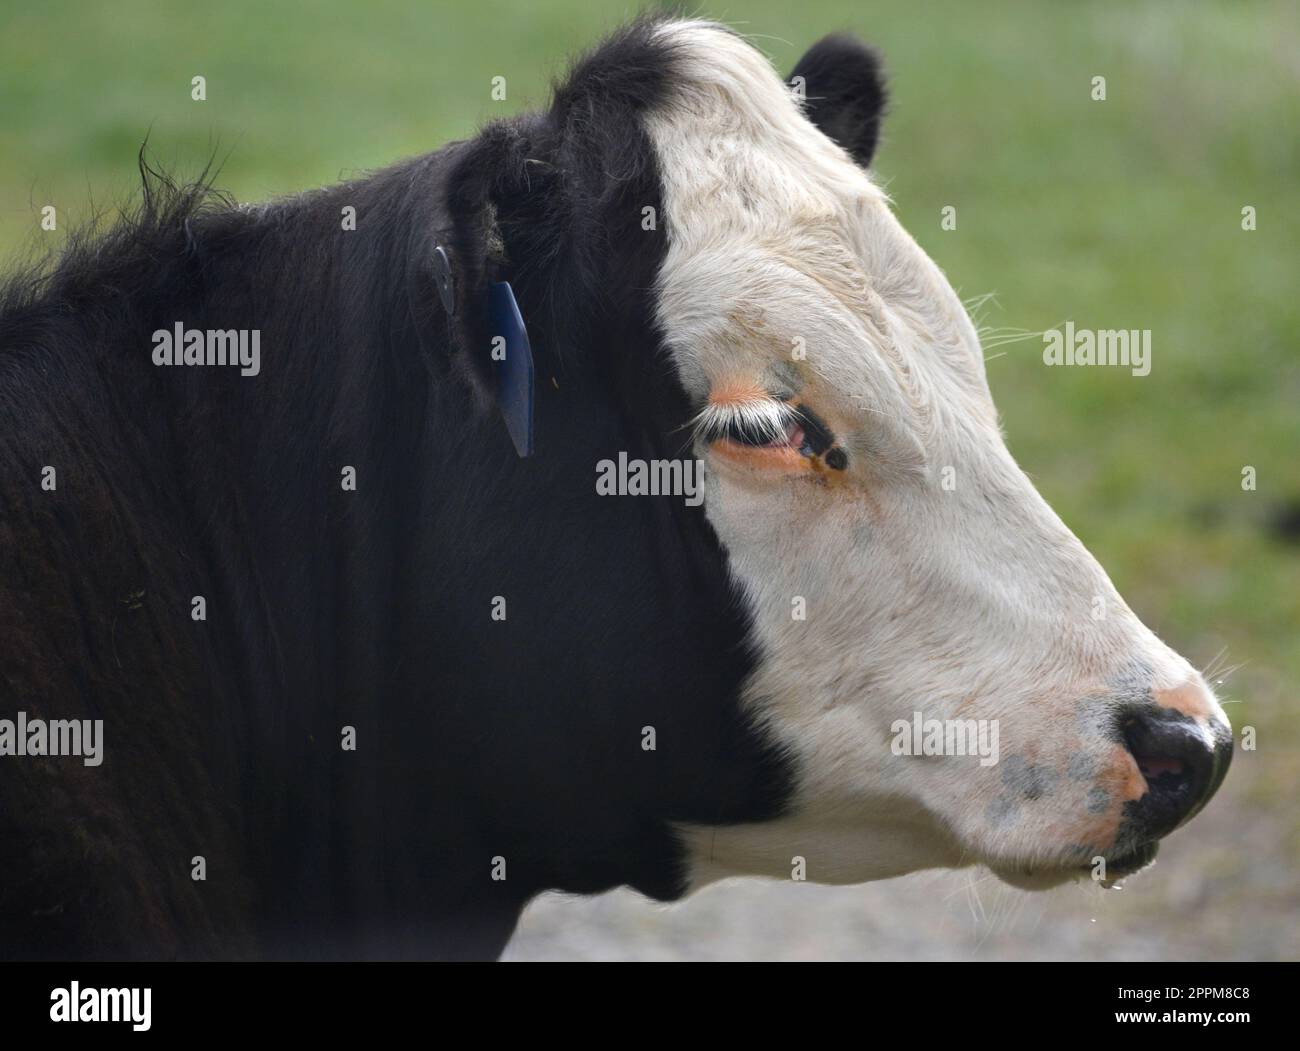 Cattle with identification tags in their ears on a farm in Abingdon,Virginia Stock Photo